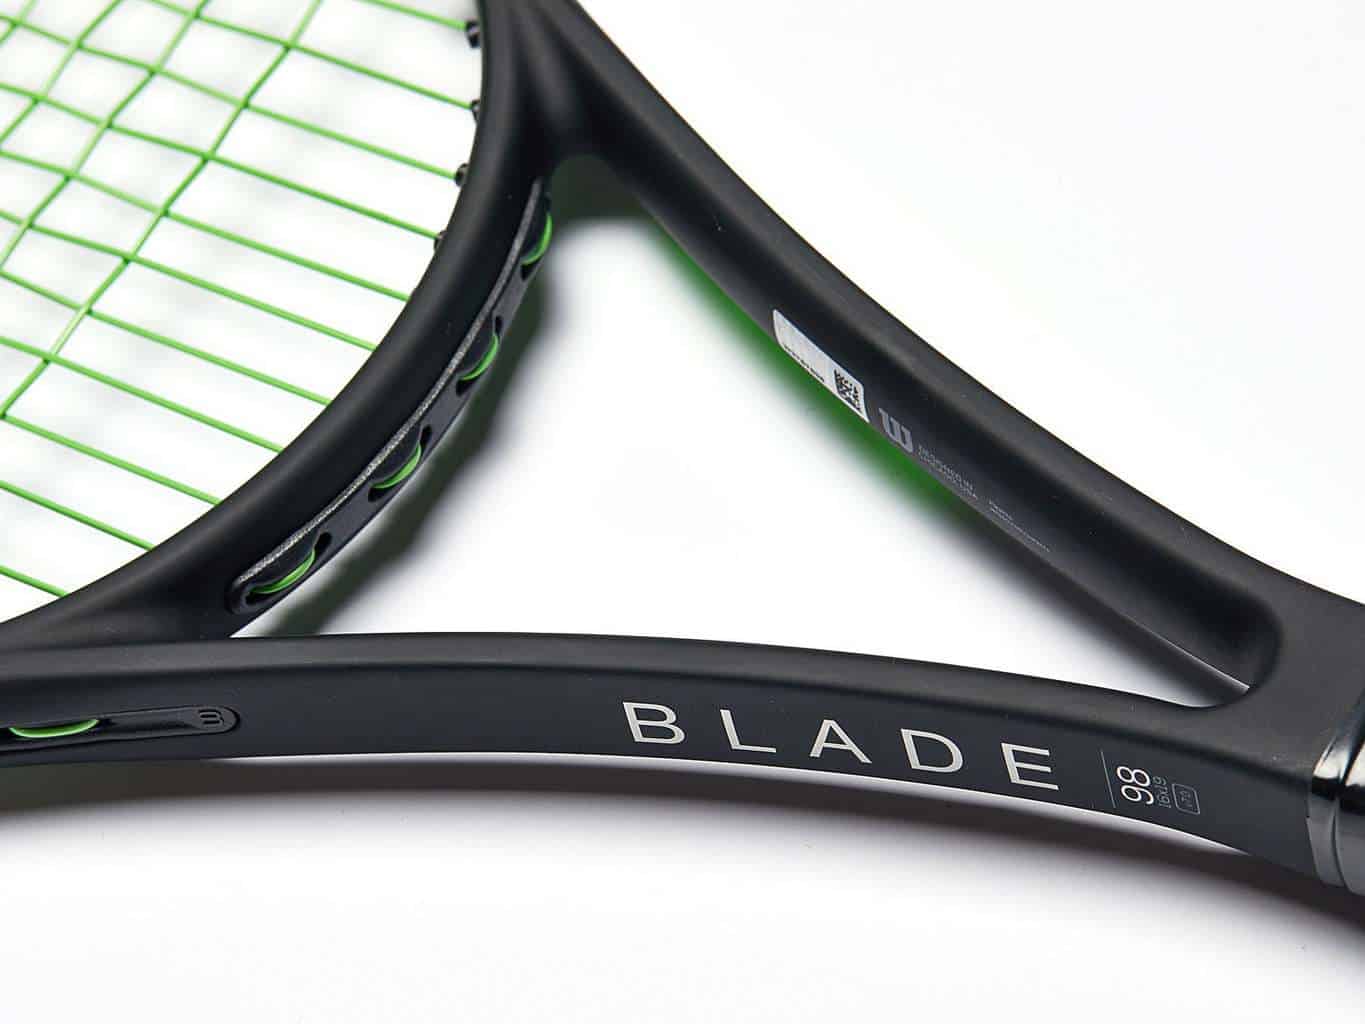 Wilson Blade 98 Review - Updated for 2021!